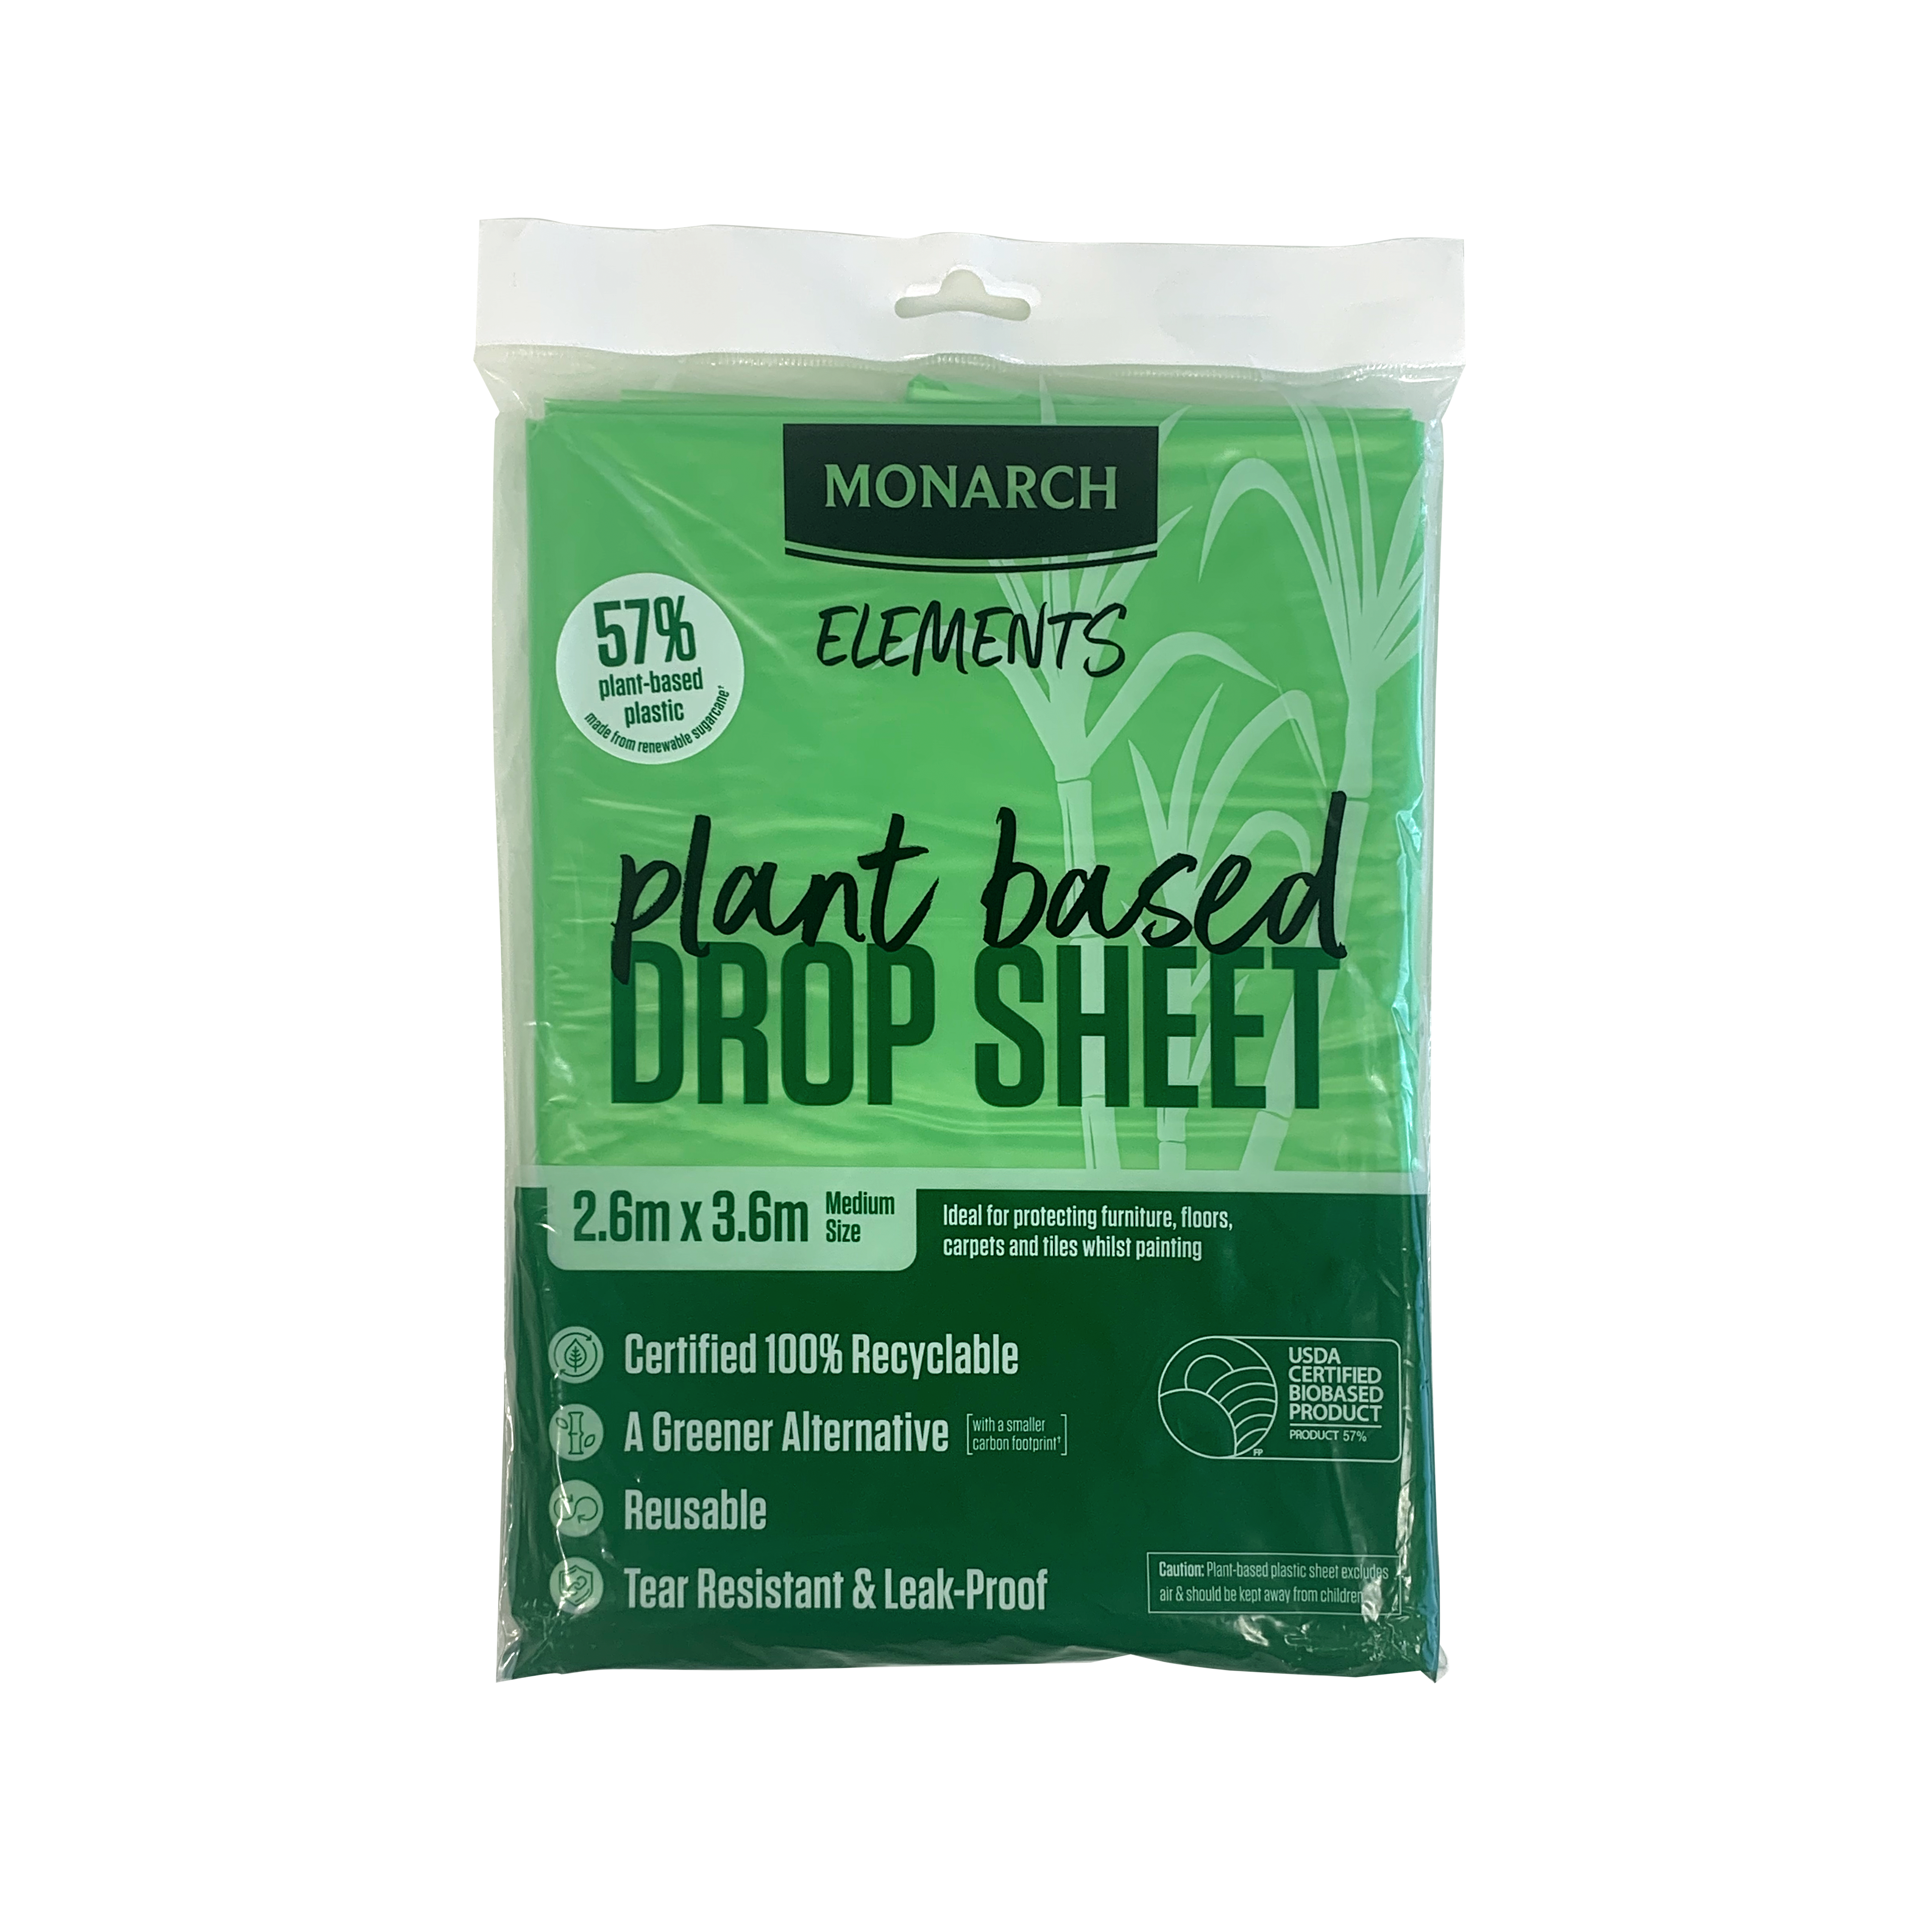 Introducing Monarch Elements Plant Based Drop Sheet